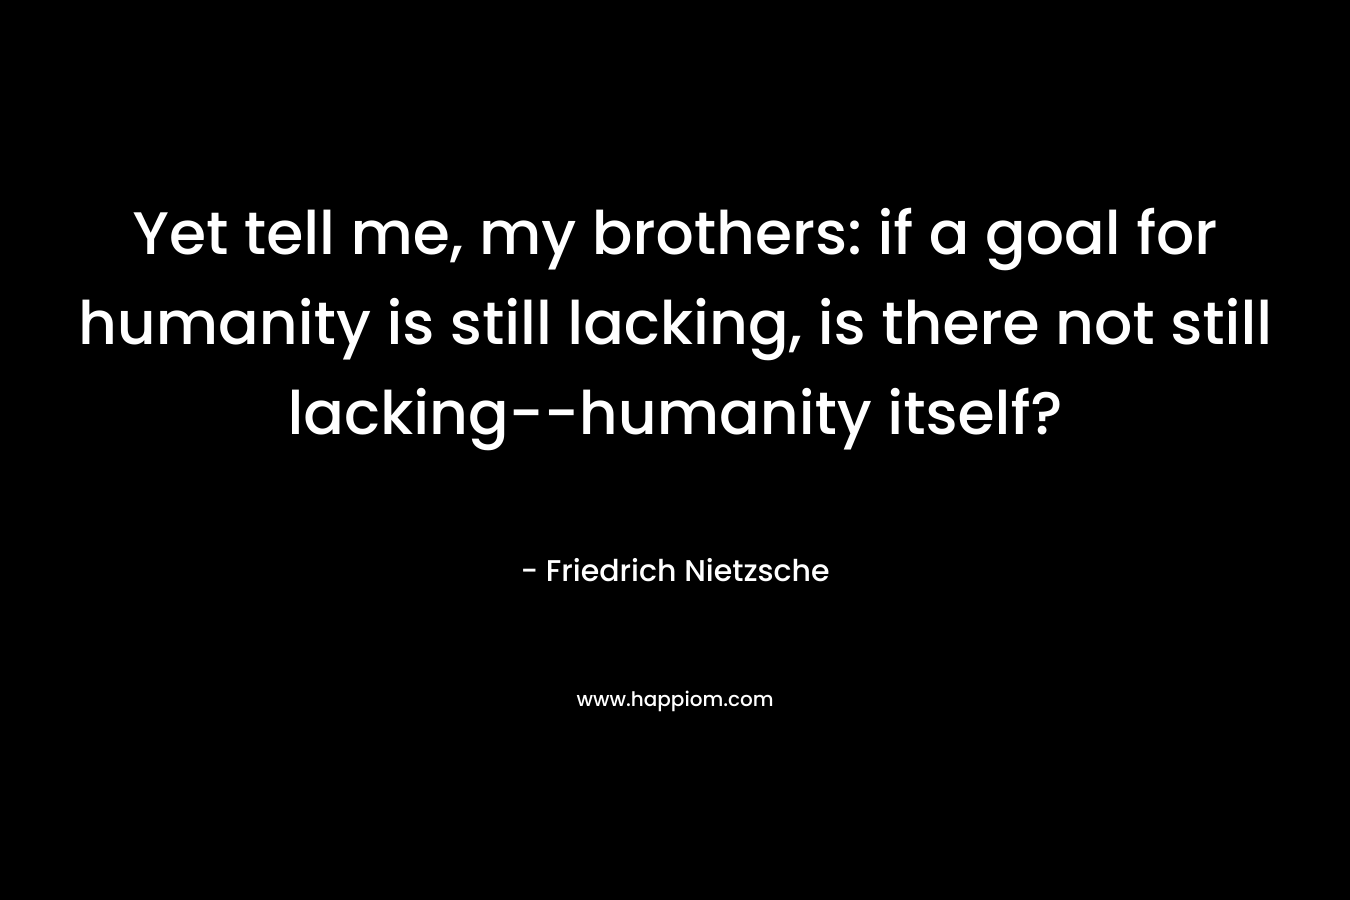 Yet tell me, my brothers: if a goal for humanity is still lacking, is there not still lacking--humanity itself?